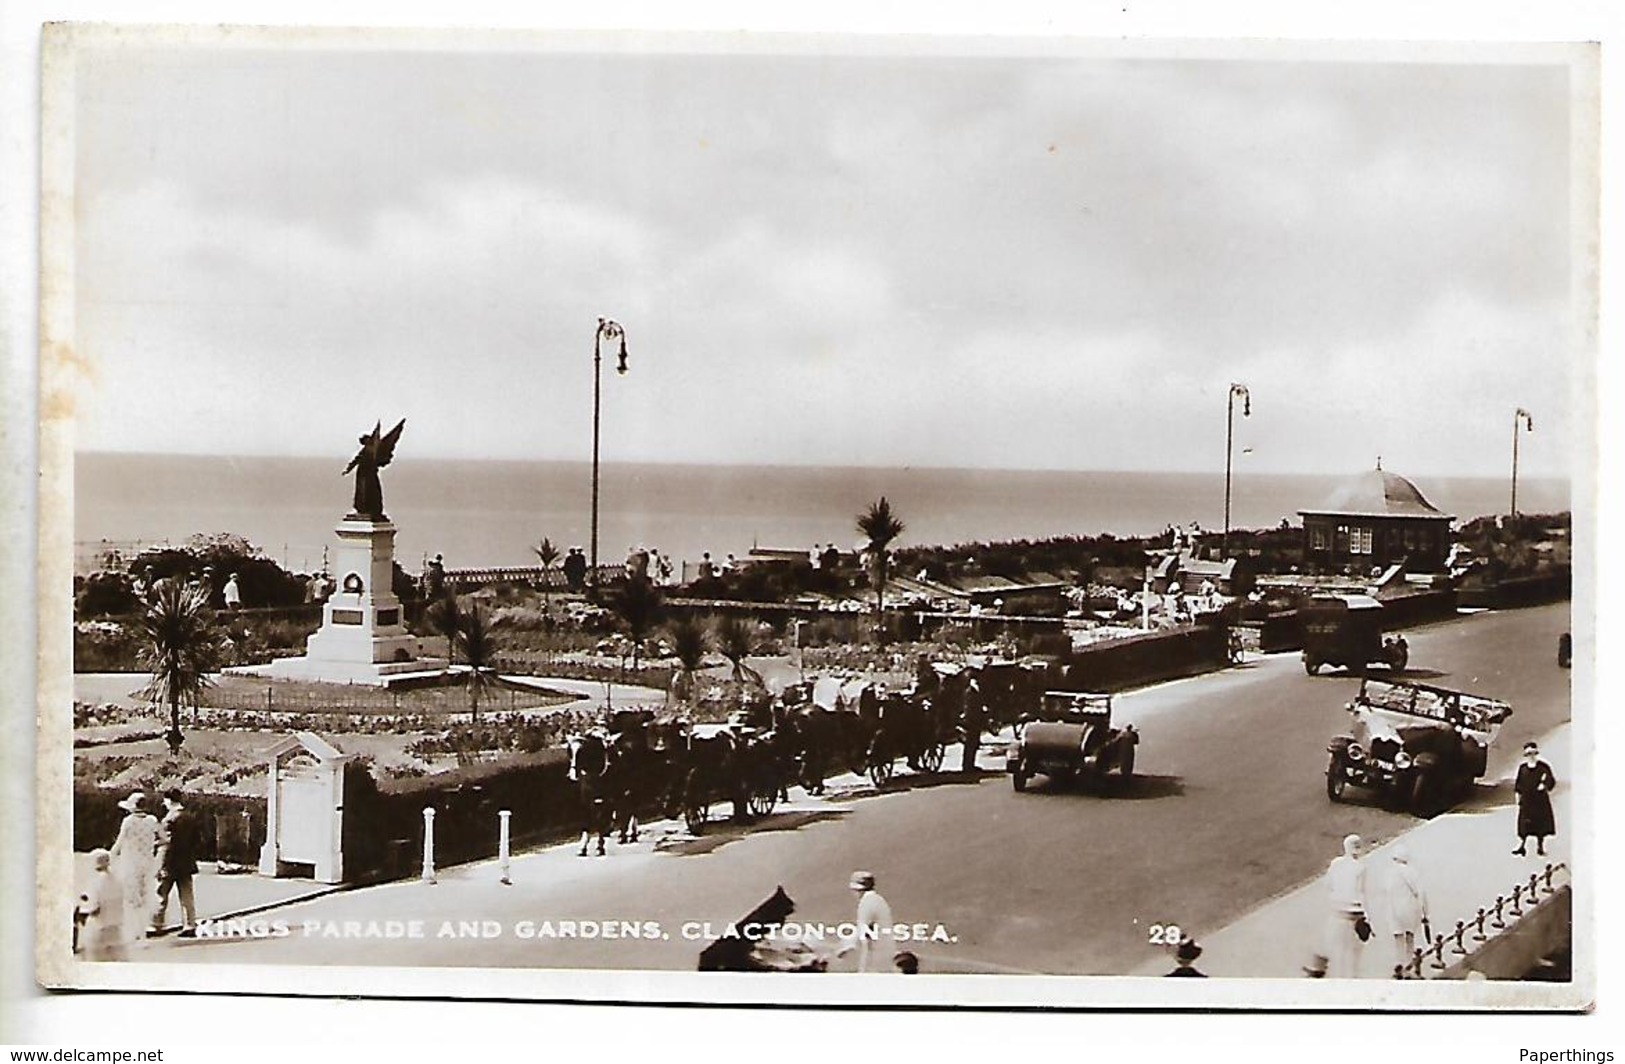 Real Photo Postcard, Clacton-on-sea, Kings Parade And Gardens. People, Horse And Cart, Cars, Automobile. - Clacton On Sea